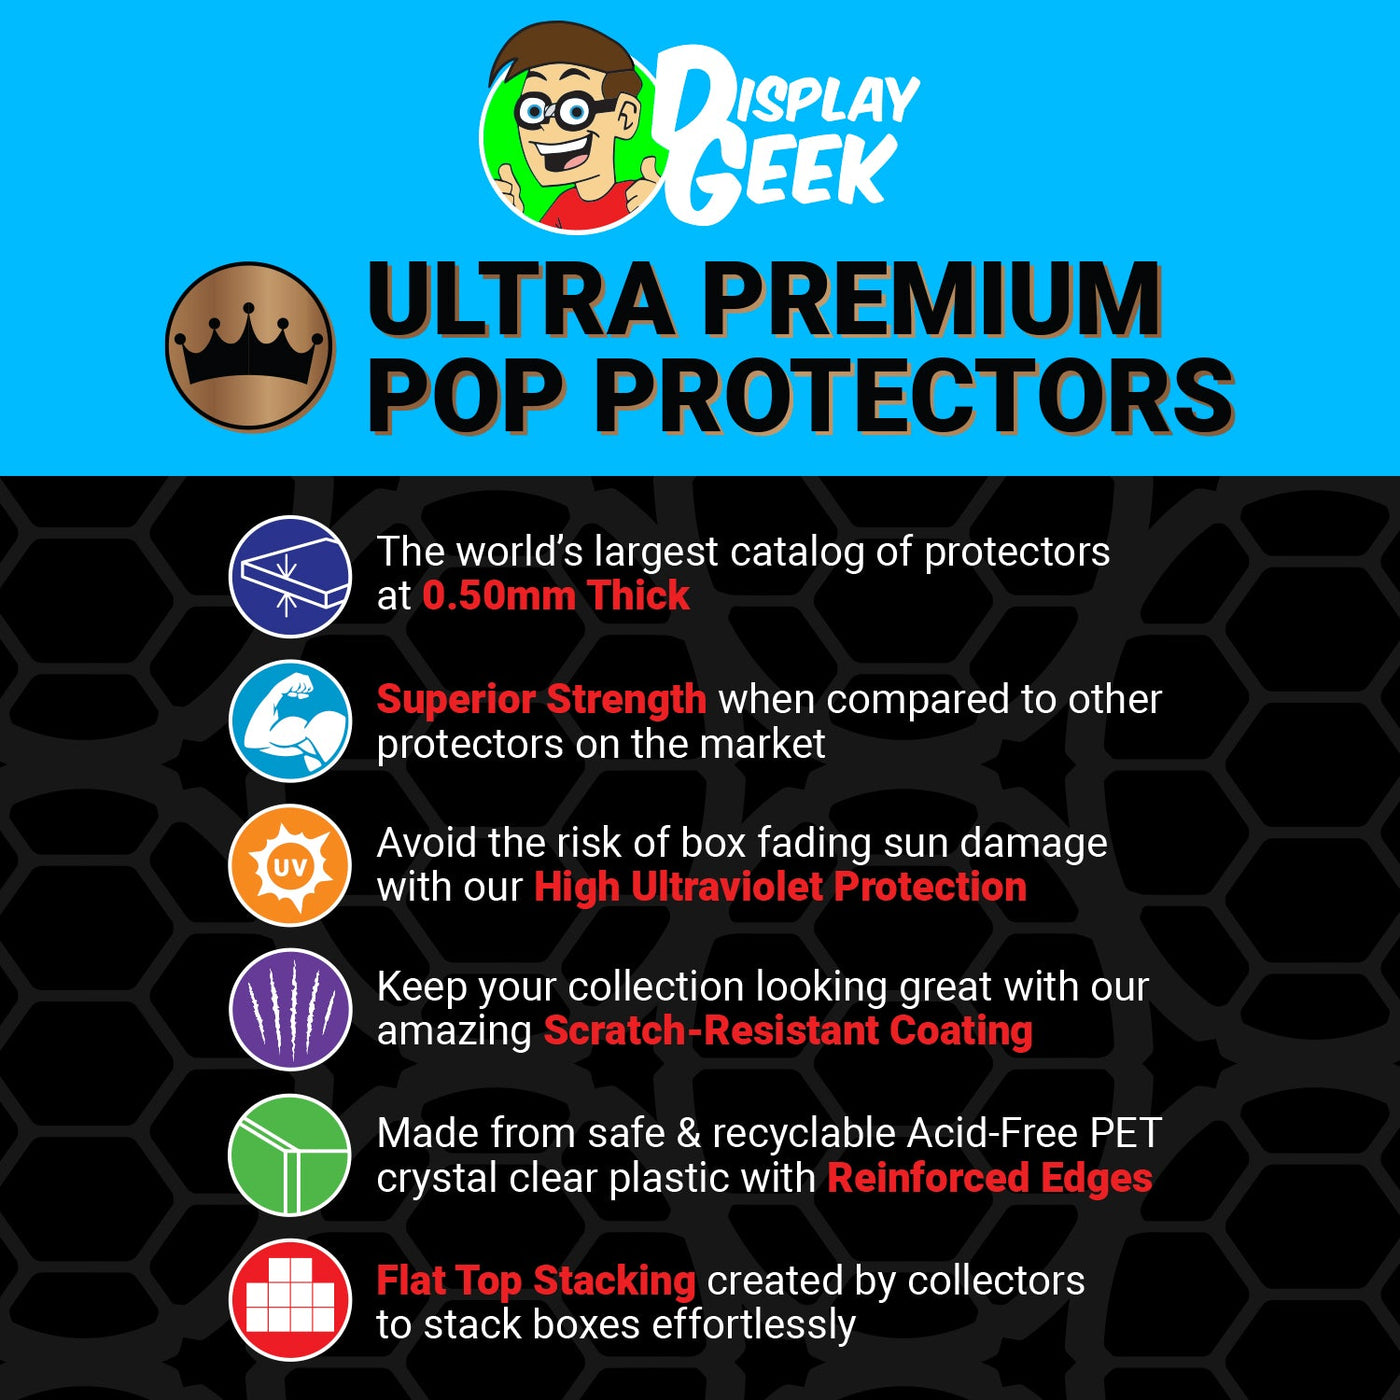 Pop Protector for Goofy Dumbo Flying Elephant Attraction #105 Funko Pop Rides on The Protector Guide App by Display Geek